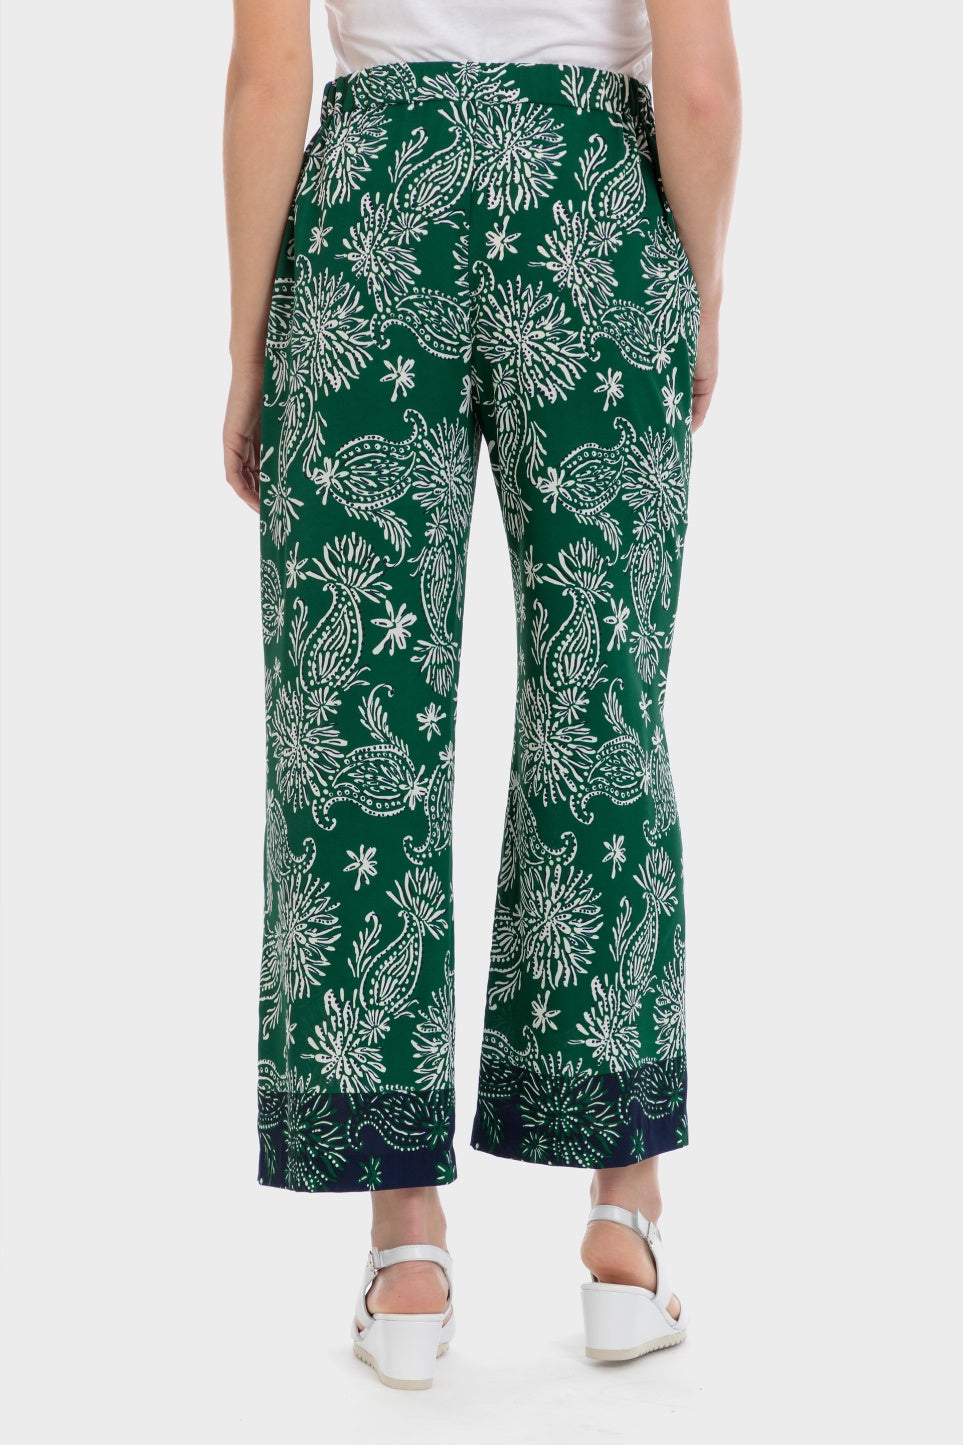 Punt Roma Cashmere Print Trousers - Green 2 Shaws Department Stores